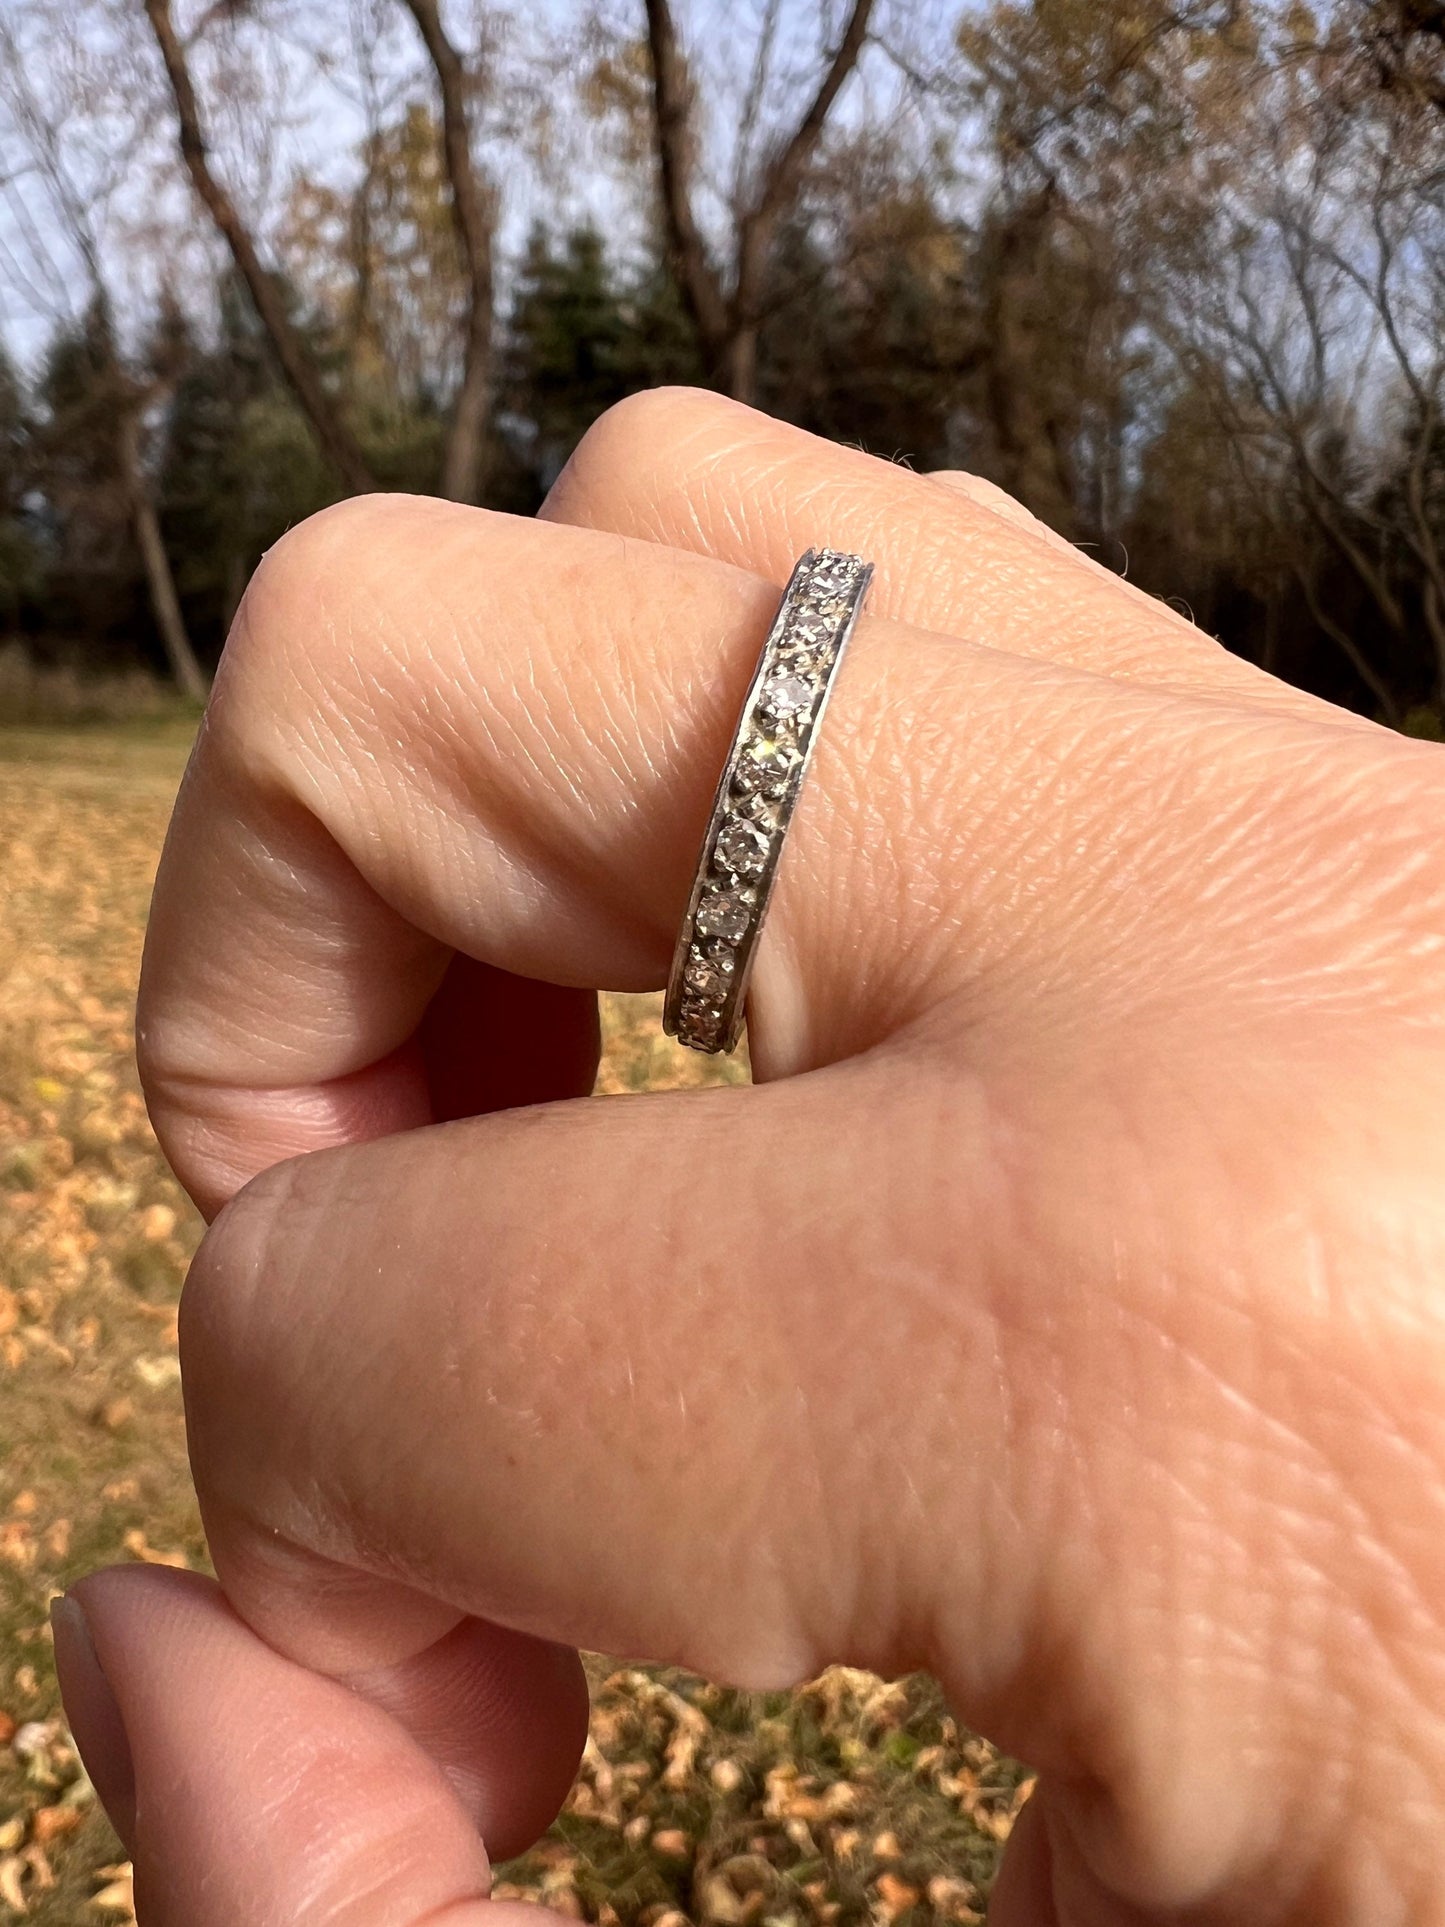 FRENCH Antique PLATINUM 23 Old Single Cut Diamond FuLL ETERNiTY Band Ring Chunky Wedding Anniversary Stacker Romantic Gift Engraved Edge